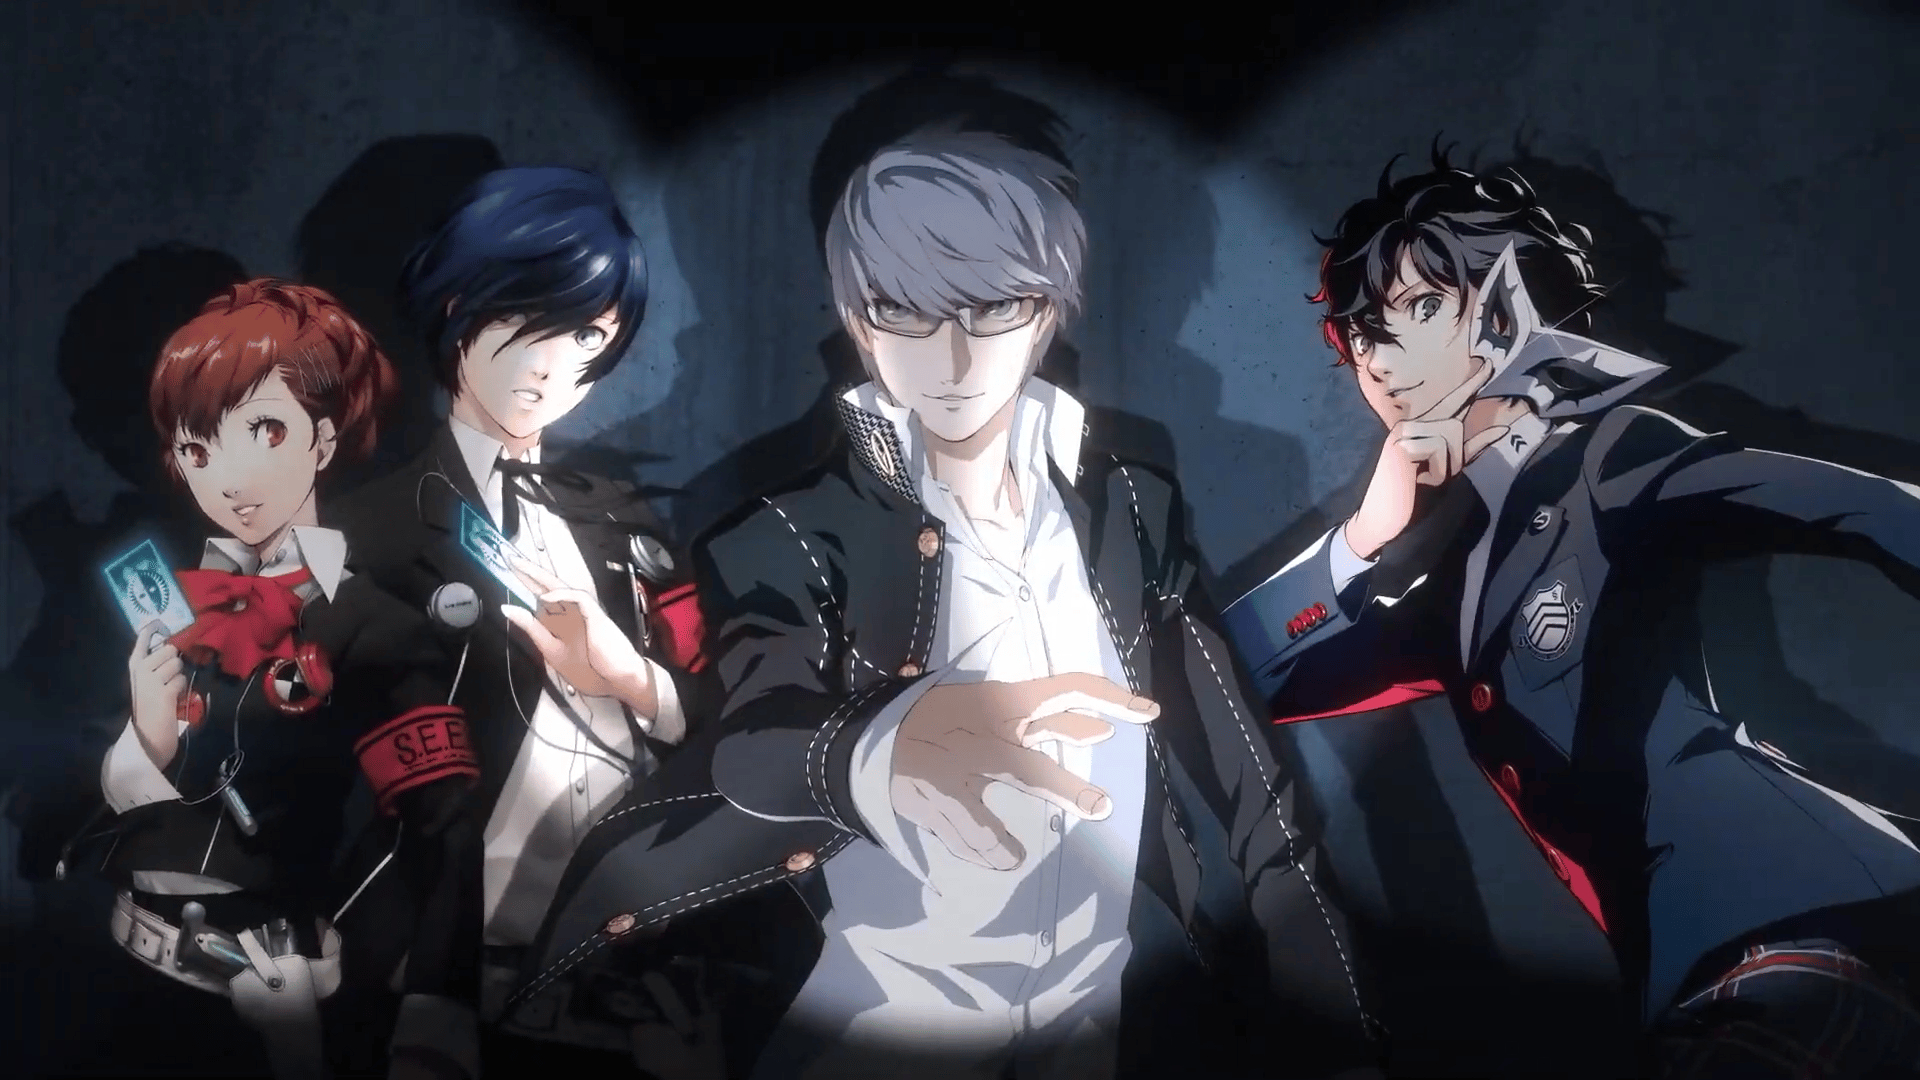 1920x1080 UPDATES] Persona 3 Portable, Persona 4 Golden \u0026 Persona 5 Royal Confirmed For PC, PS, \u0026 Xbox One \u0026 Series X|S Noisy Pixel